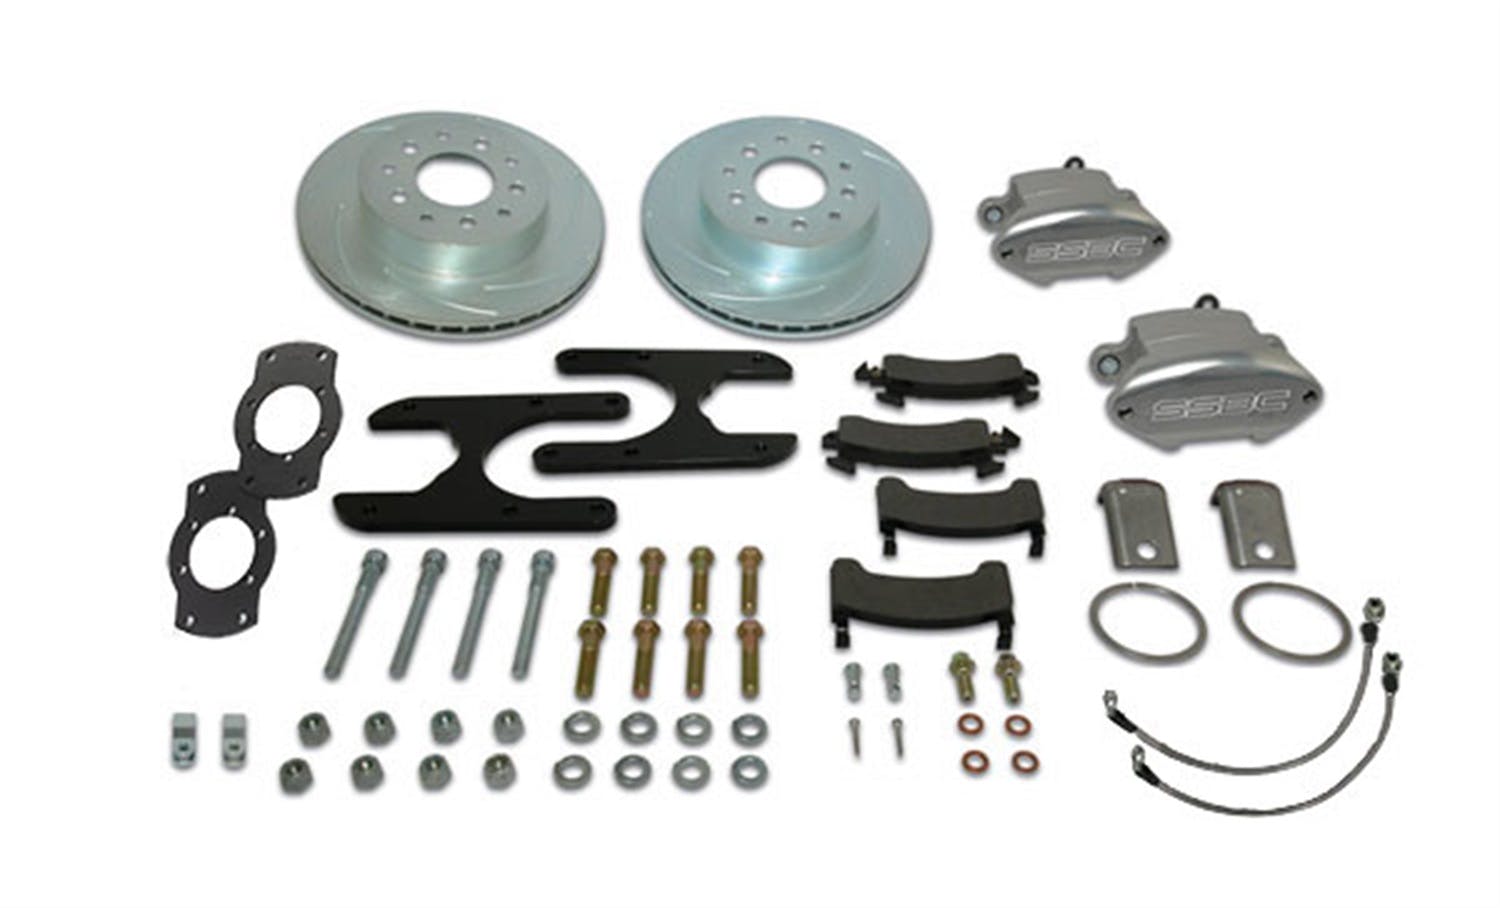 Stainless Steel Brakes A130-5R Sport R1 A130-5 kit w/red calipers